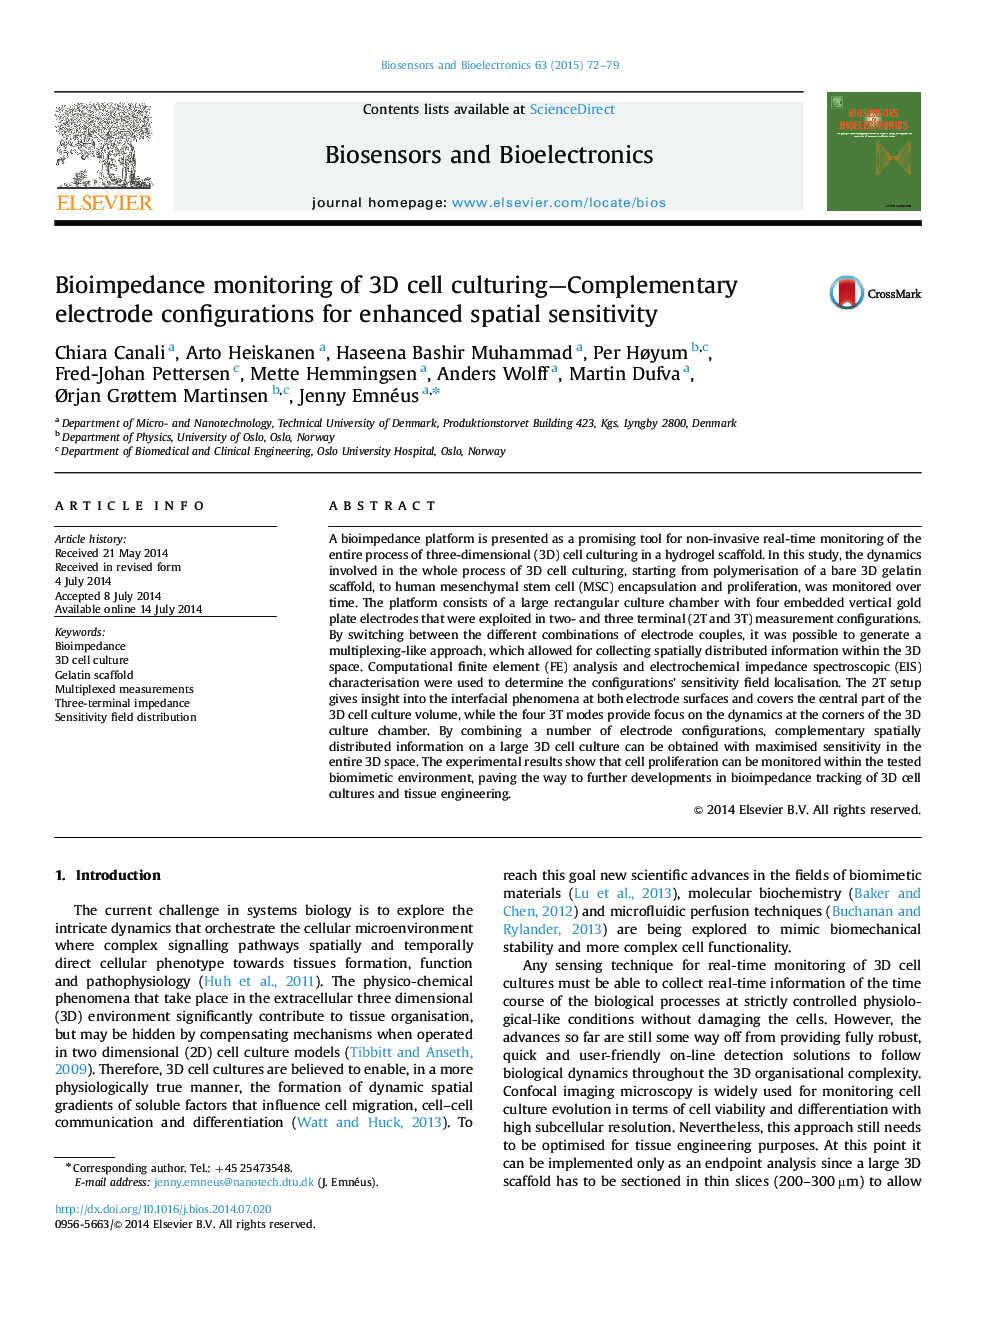 Bioimpedance monitoring of 3D cell culturing-Complementary electrode configurations for enhanced spatial sensitivity